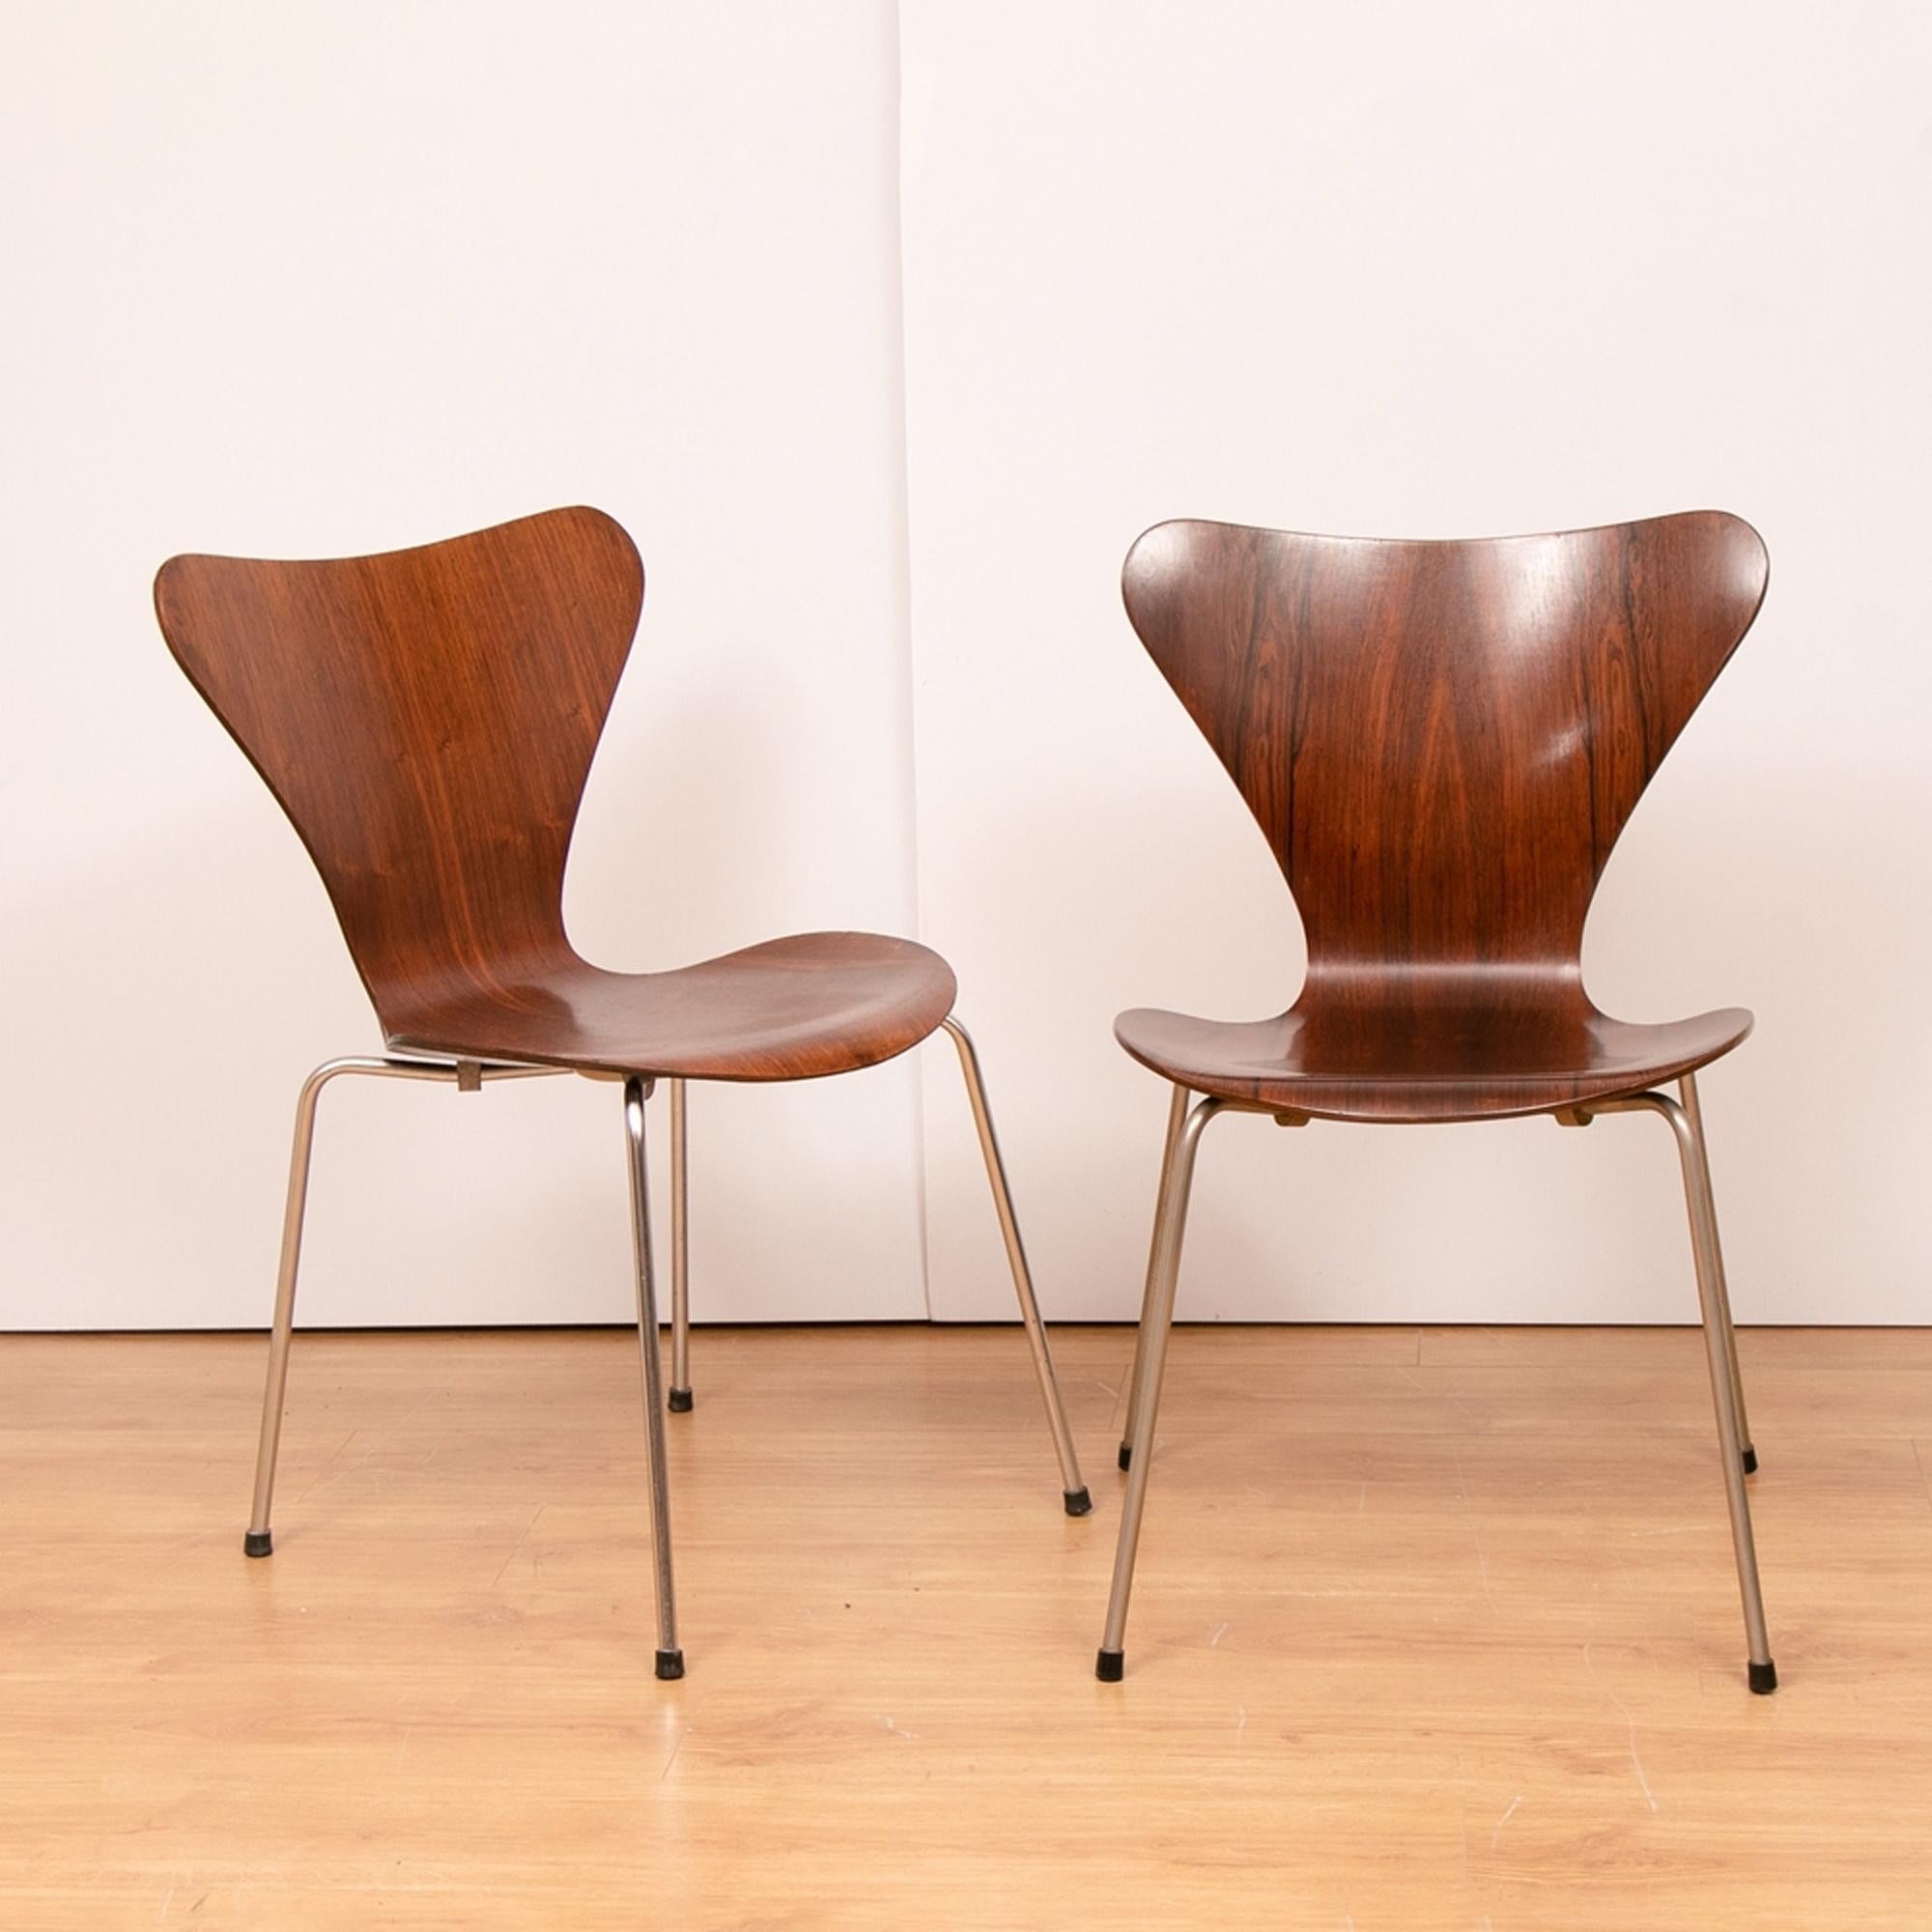 Set of 5 series 7 model 3107 rosewood chairs by Arne Jacobsen, circa 1960.